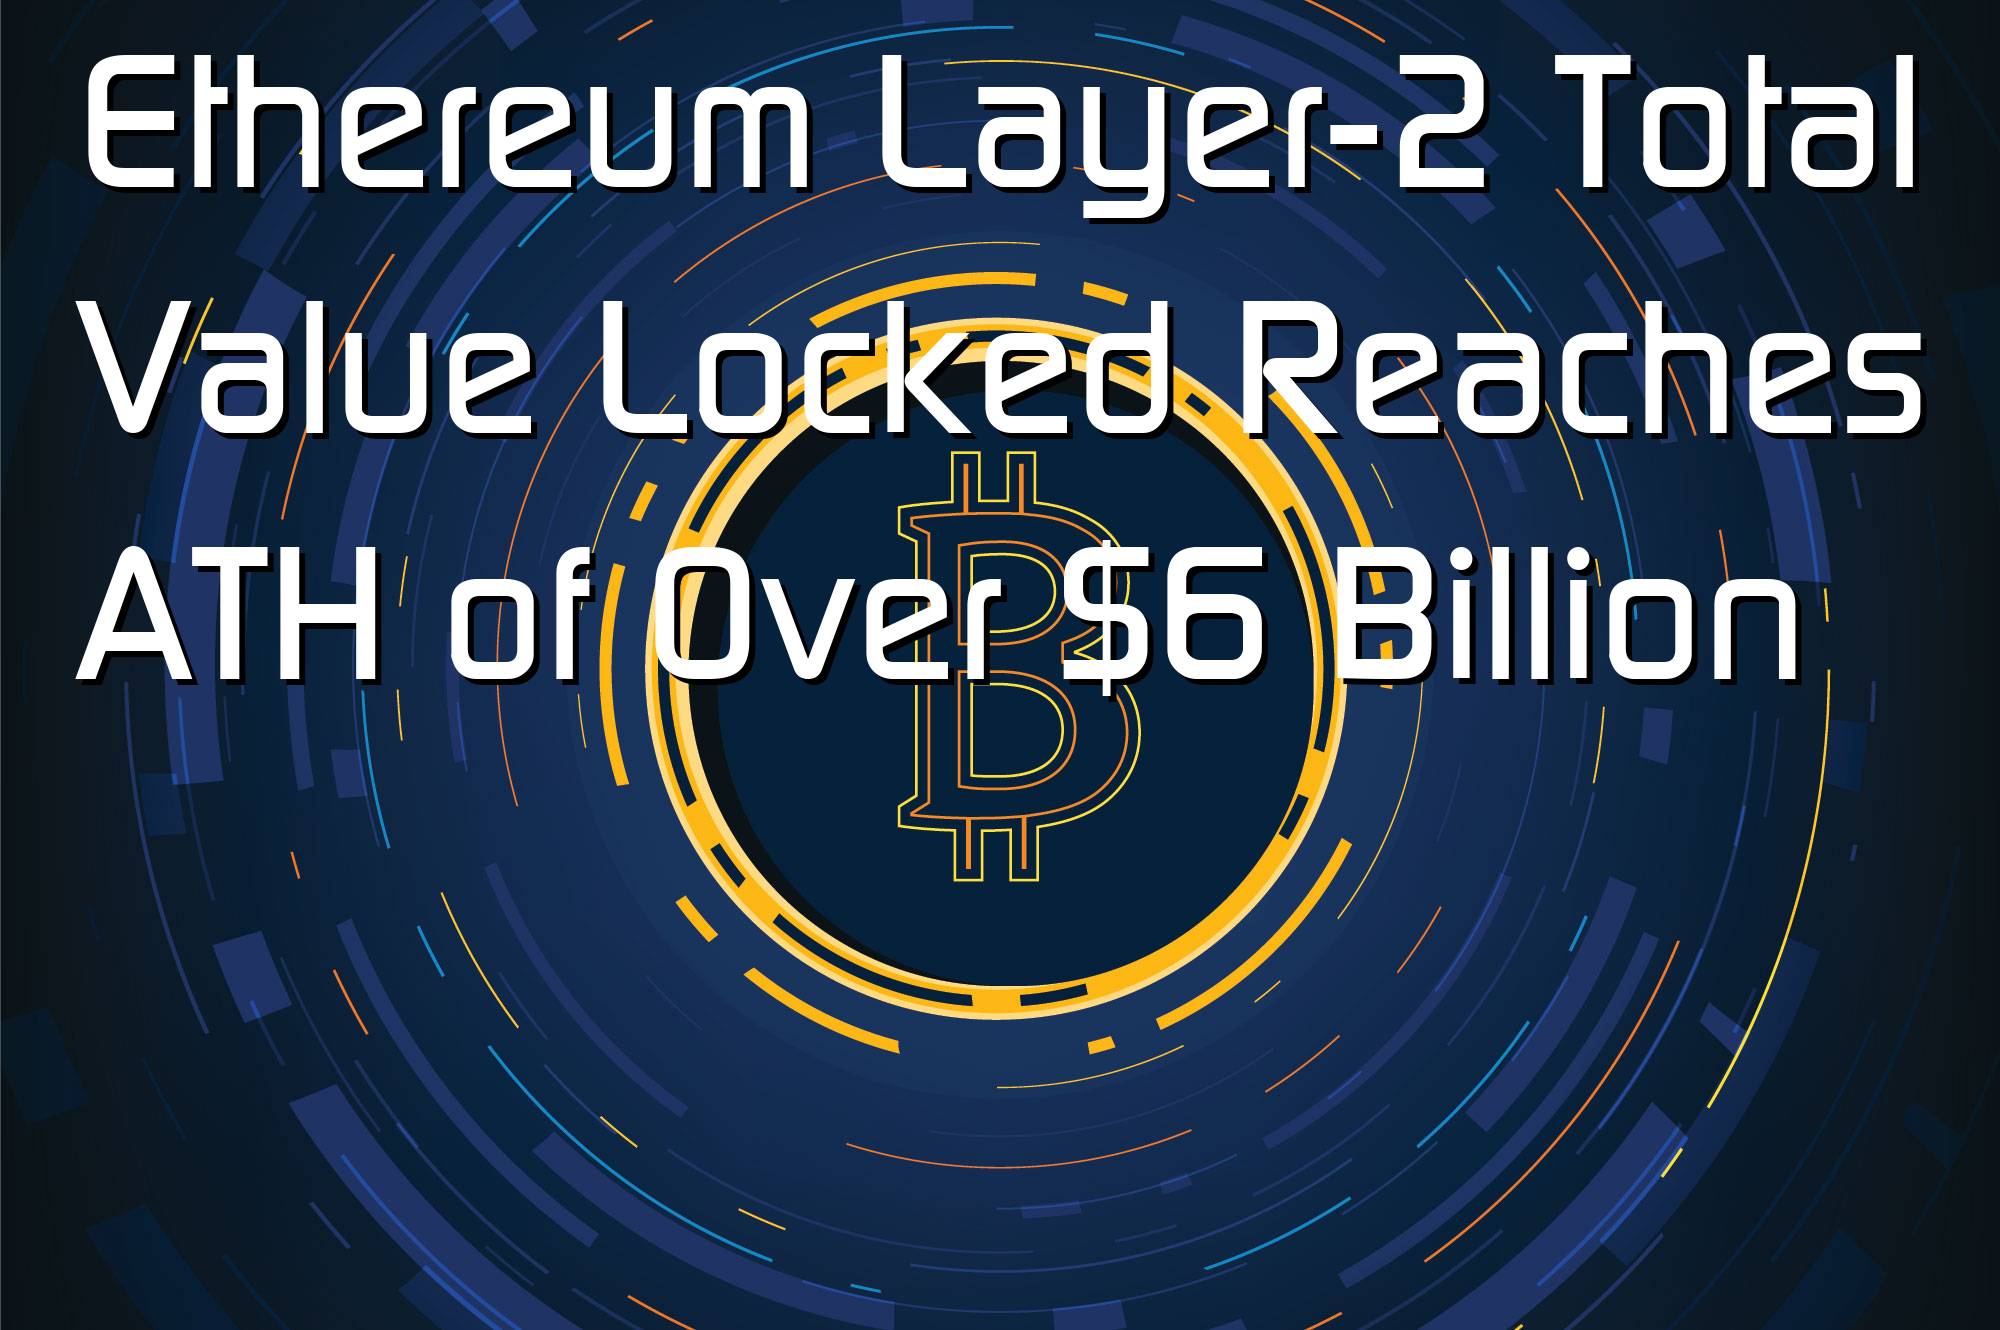 @$56451: Ethereum Layer-2 Total Value Locked Reaches ATH of Over $6 Billion